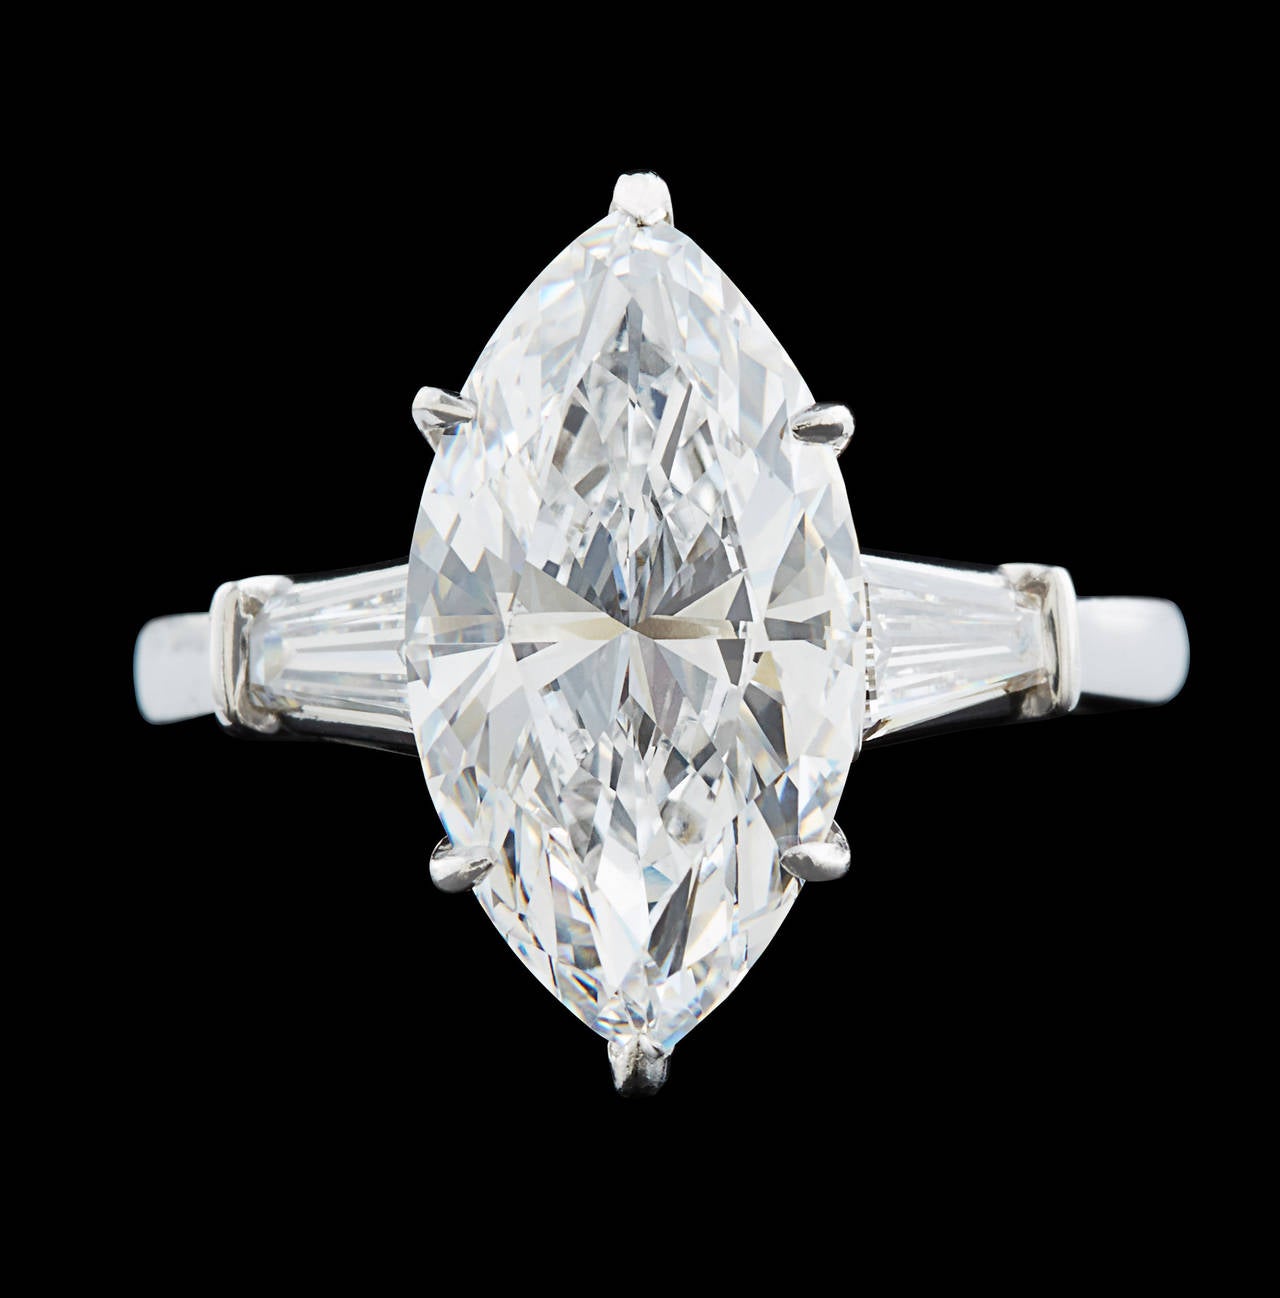 Spectacular Platinum 3-Stone Ring Featuring a Crystal Clear 5.02 Carat D Flawless Marquise Cut Diamond. Flanked on each side are tapered baguette diamonds weighing approximately 0.50 carat total weight. The ring is a sizable 8.25 and weighs 8.2